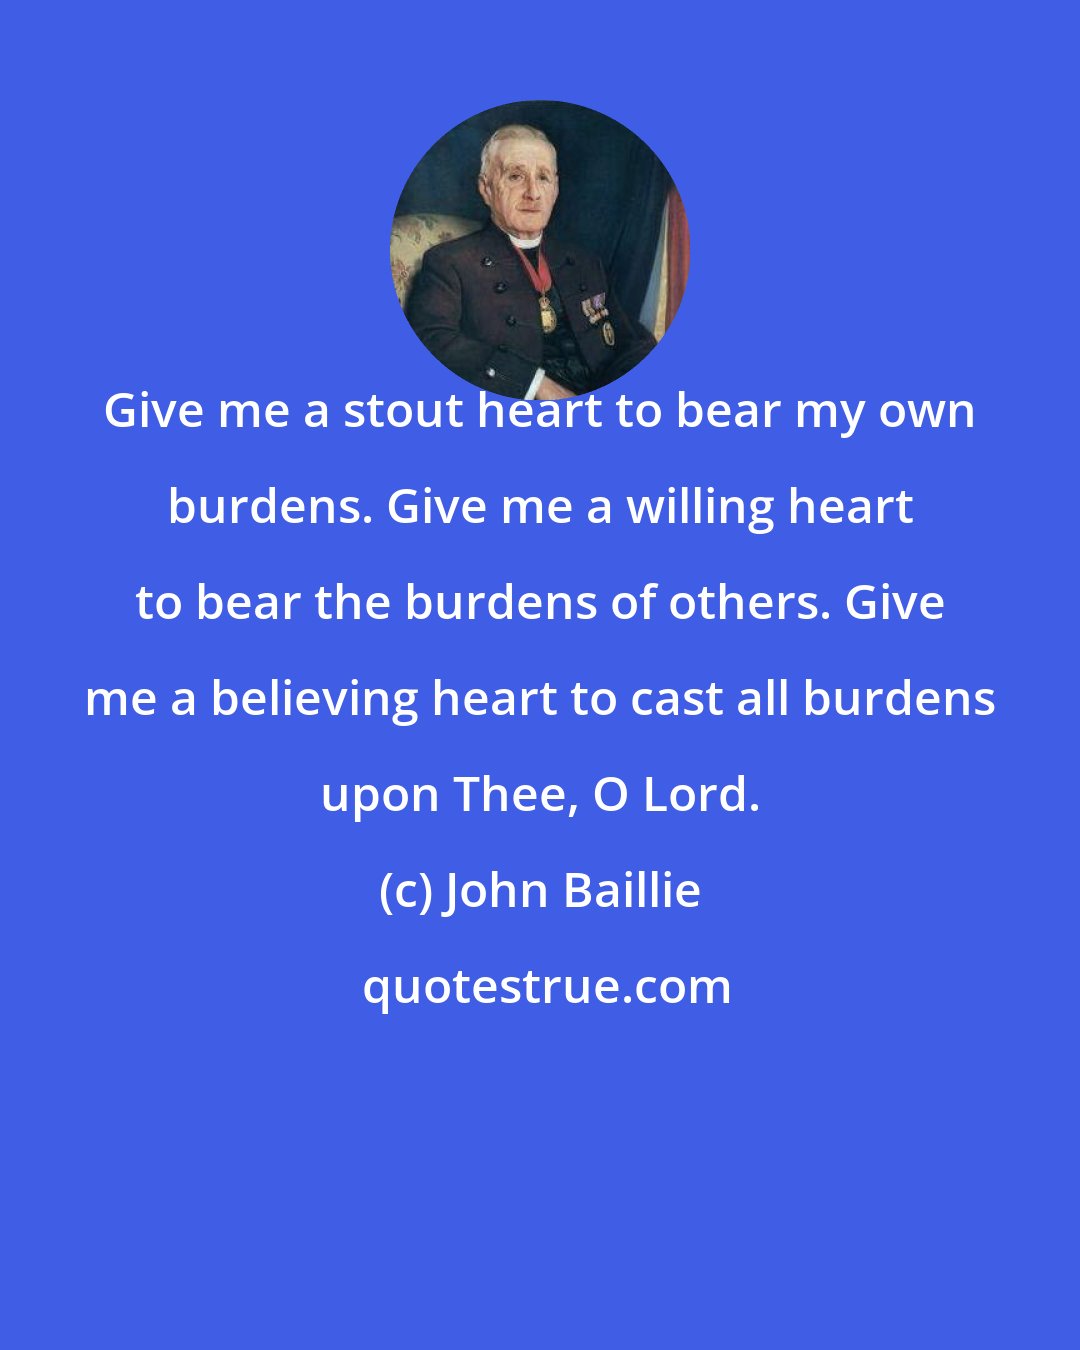 John Baillie: Give me a stout heart to bear my own burdens. Give me a willing heart to bear the burdens of others. Give me a believing heart to cast all burdens upon Thee, O Lord.